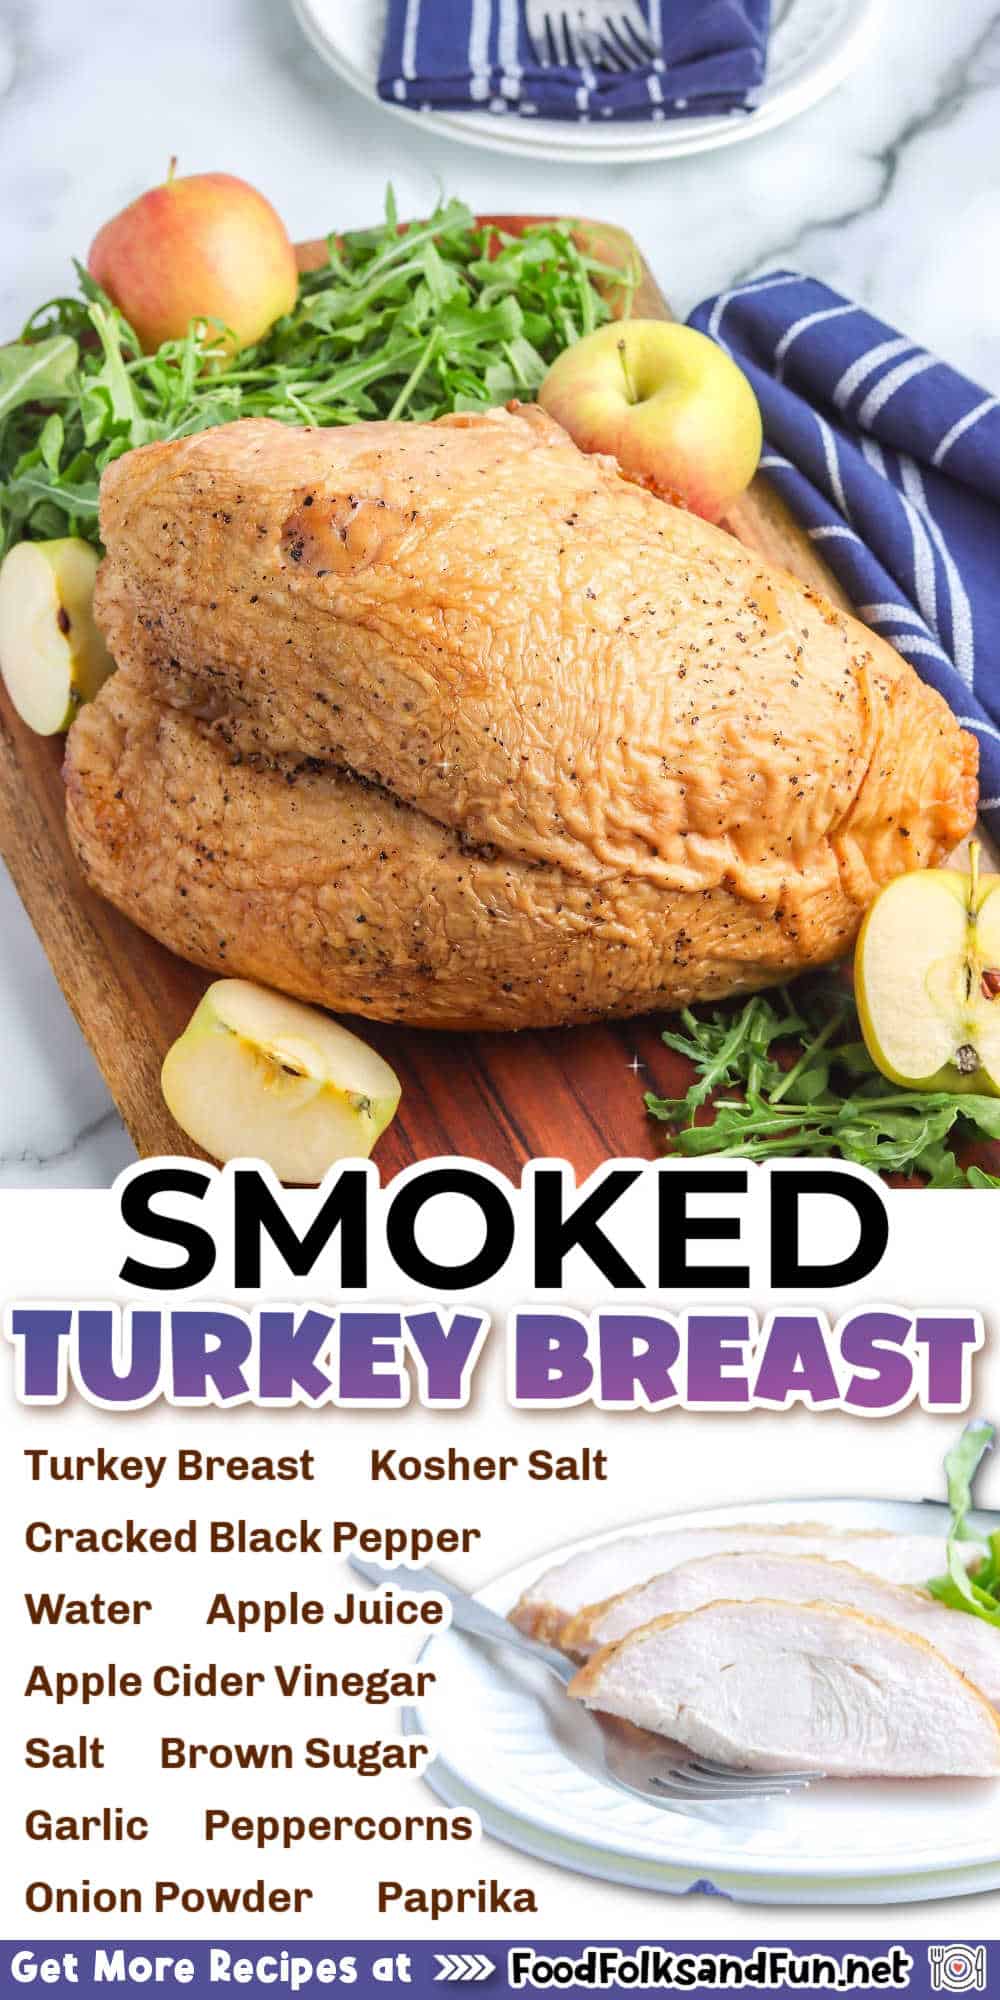 Prepare the perfect entree for any occasion with his Smoked Turkey Breast recipe. It’s juicy, loaded with flavor, and pairs perfectly with various sides! via @foodfolksandfun